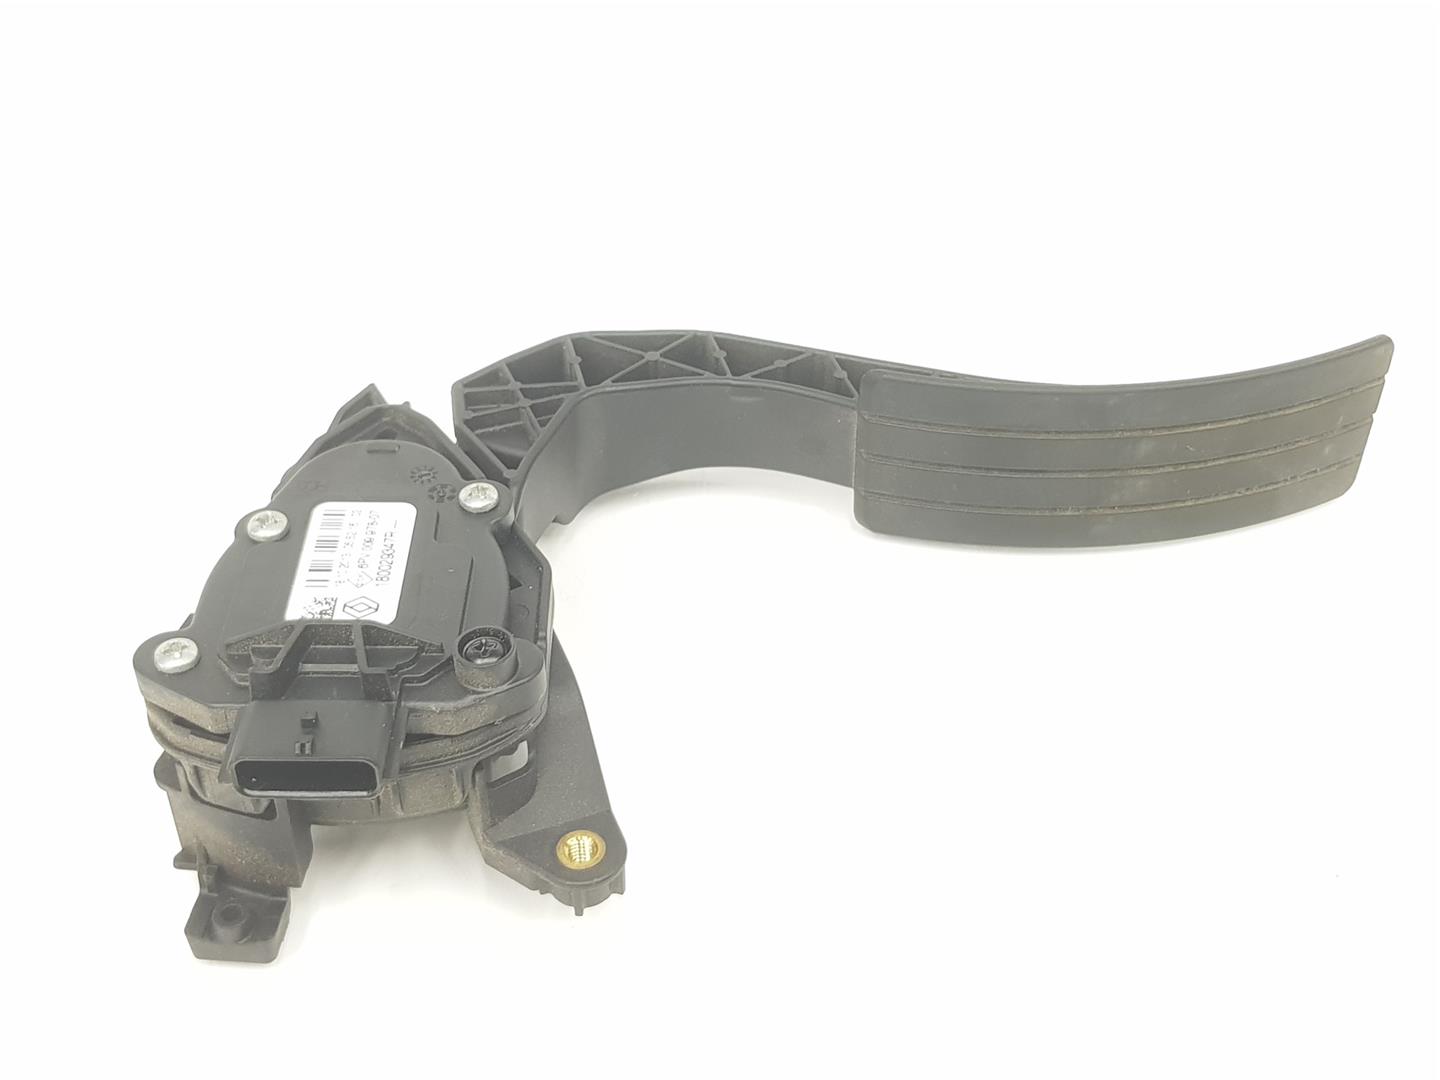 RENAULT Clio 4 generation (2012-2020) Other Body Parts 180029347R, 180029347R 23795527